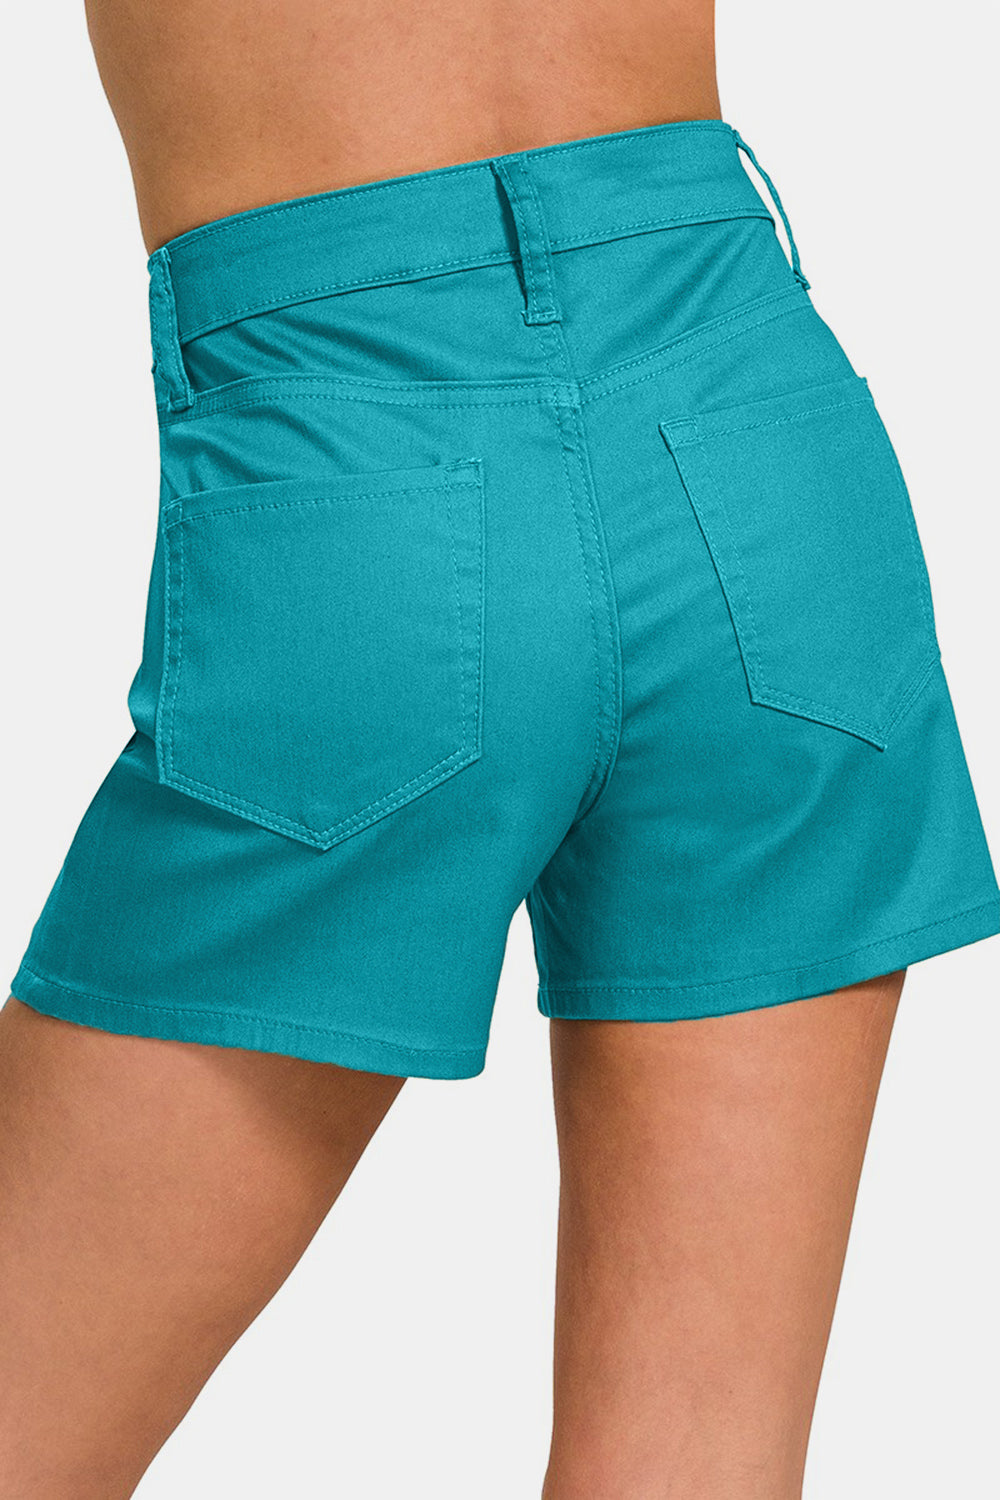 Zenana High Rise Colored Shorts - Teal - Inspired Eye Boutique